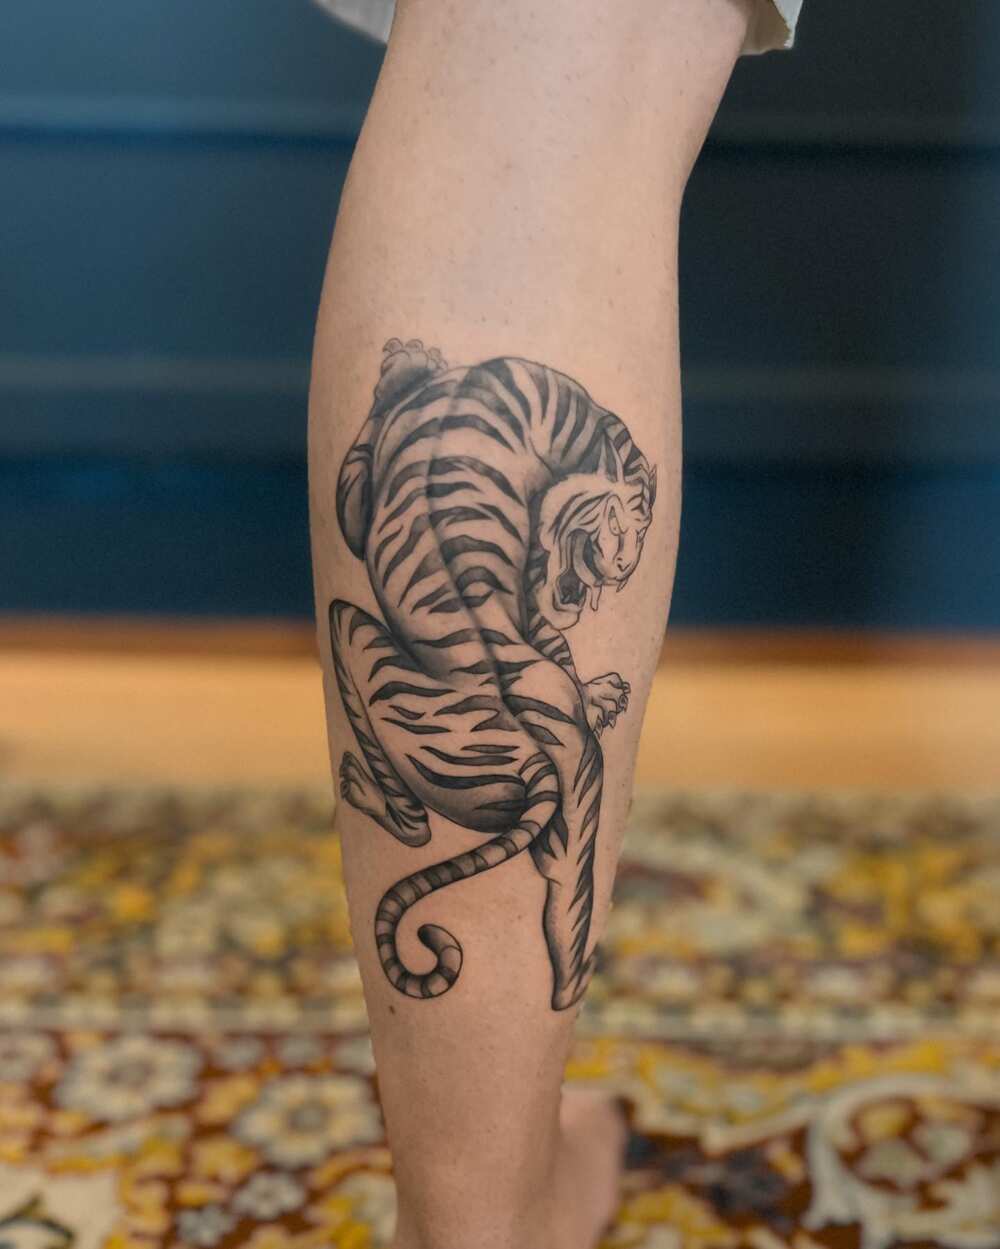 Japanese tiger tattoo meaning